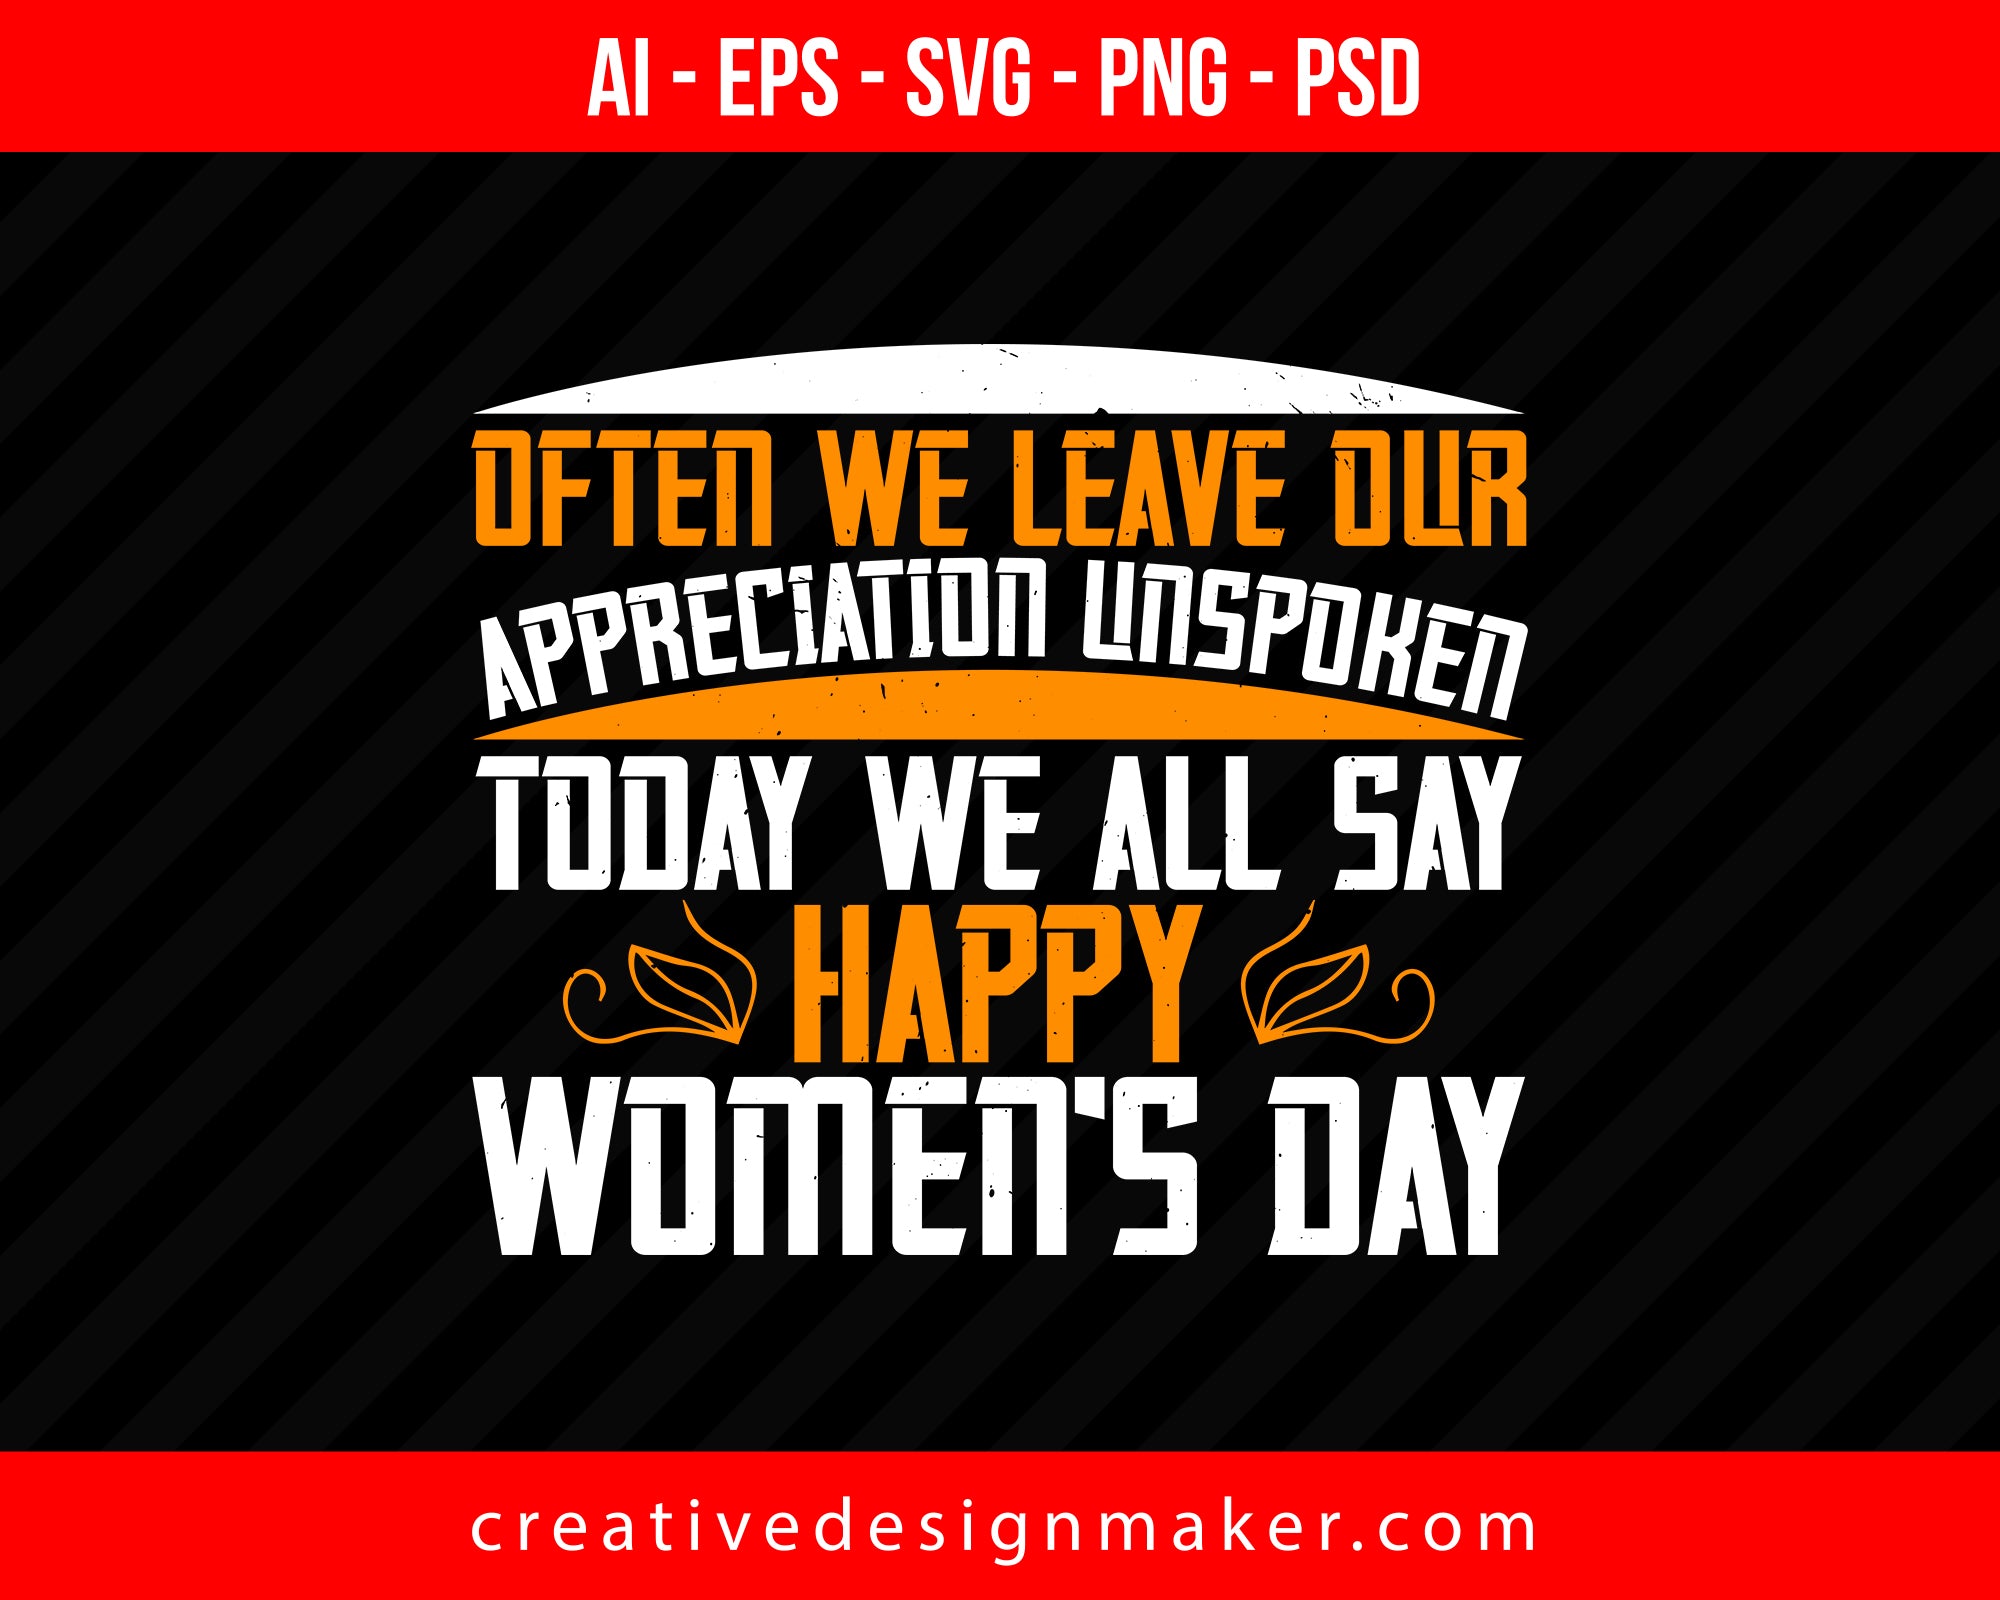 Often we leave our appreciation unspoken! Today we all say Happy Women's Day Print Ready Editable T-Shirt SVG Design!